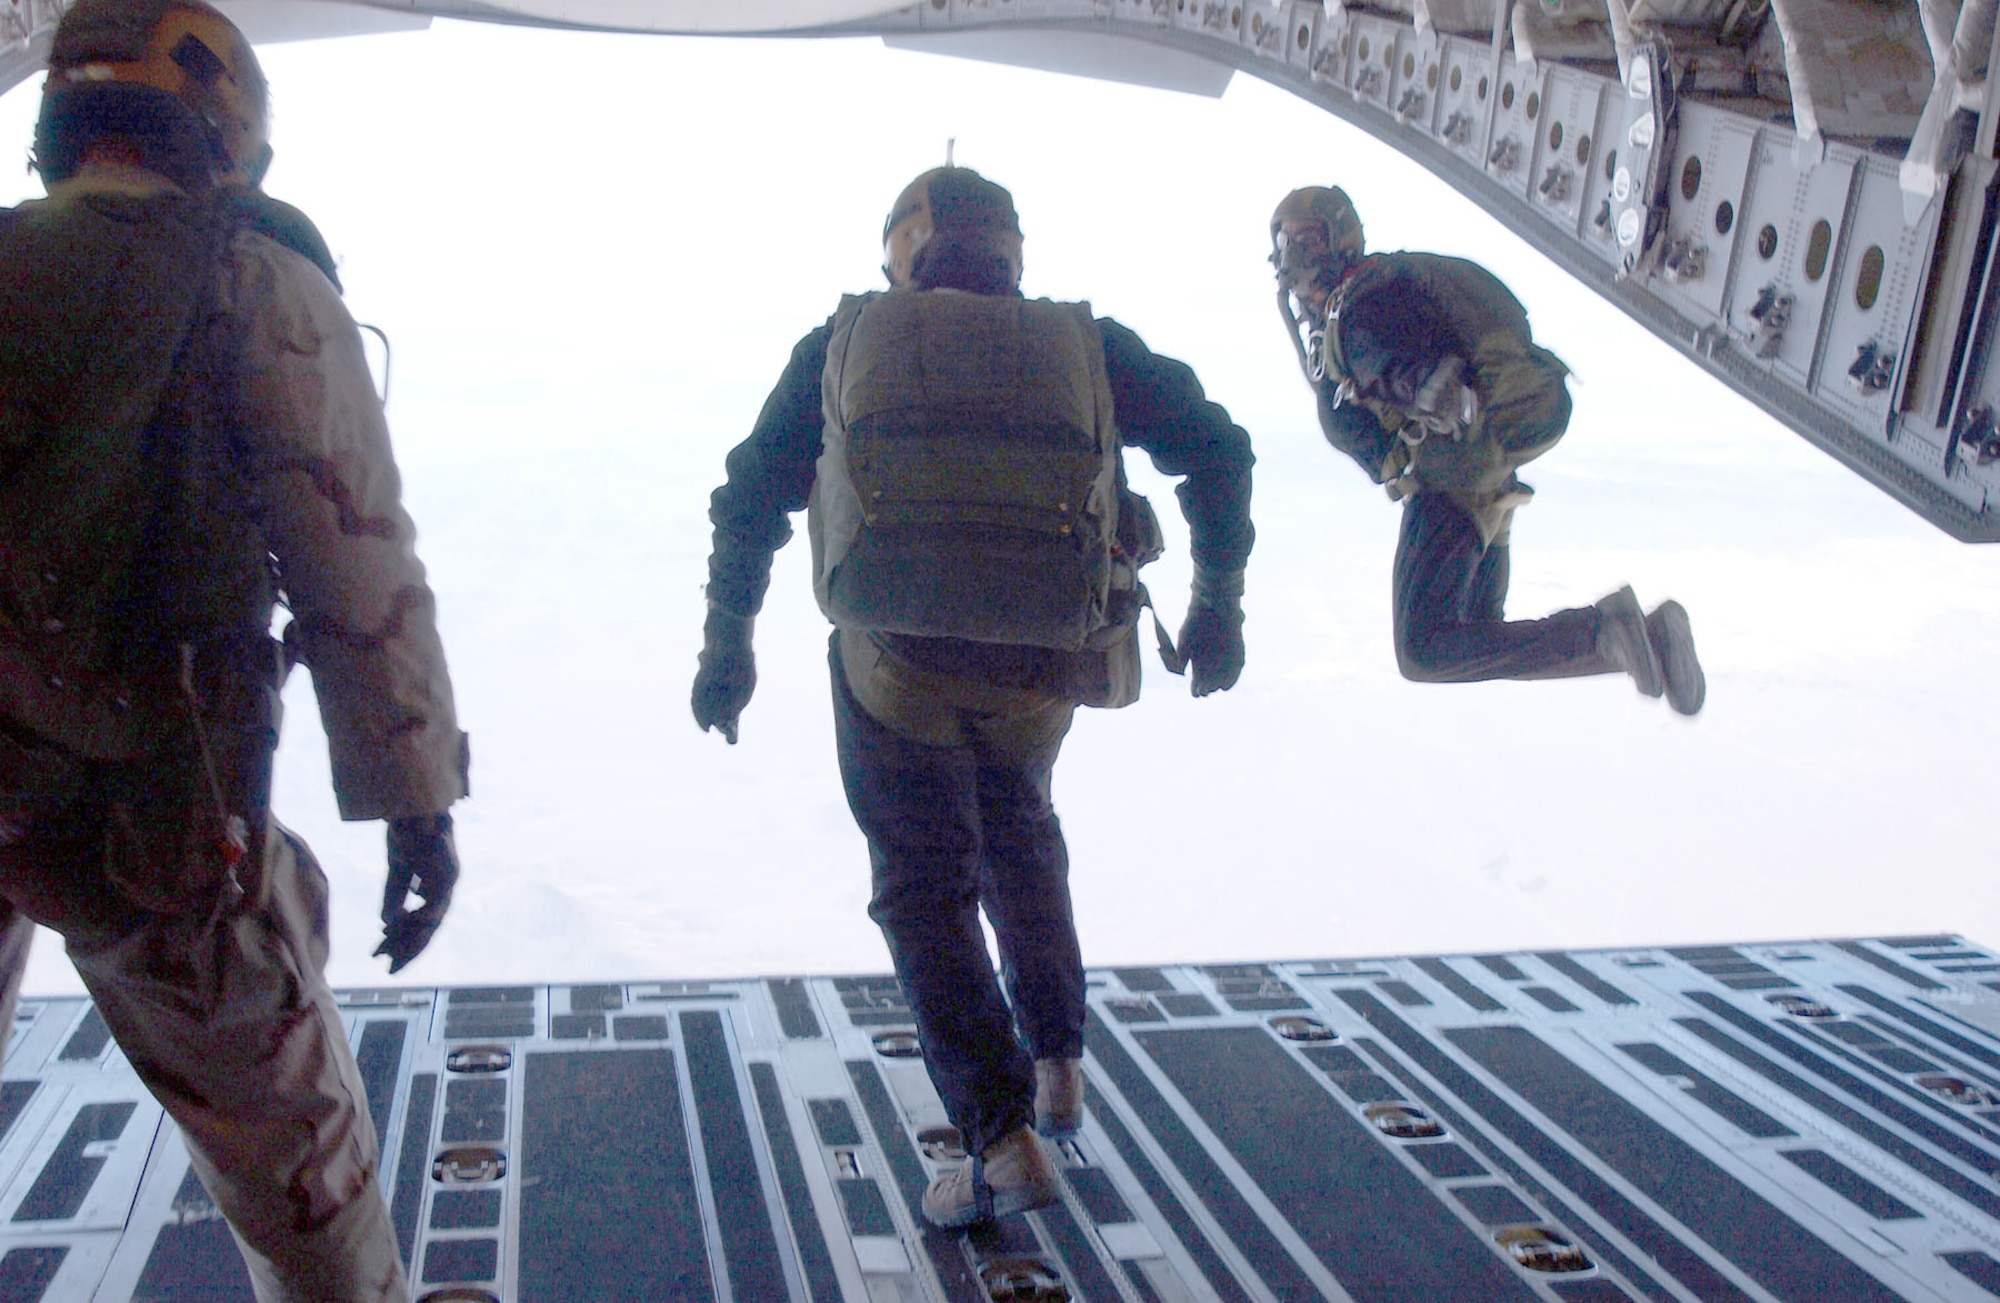 HALO (High Altitude, Low Opening) parachute training. Note the jumpers wear portable oxygen masks needed at high altitude. (U.S. Air Force photo)